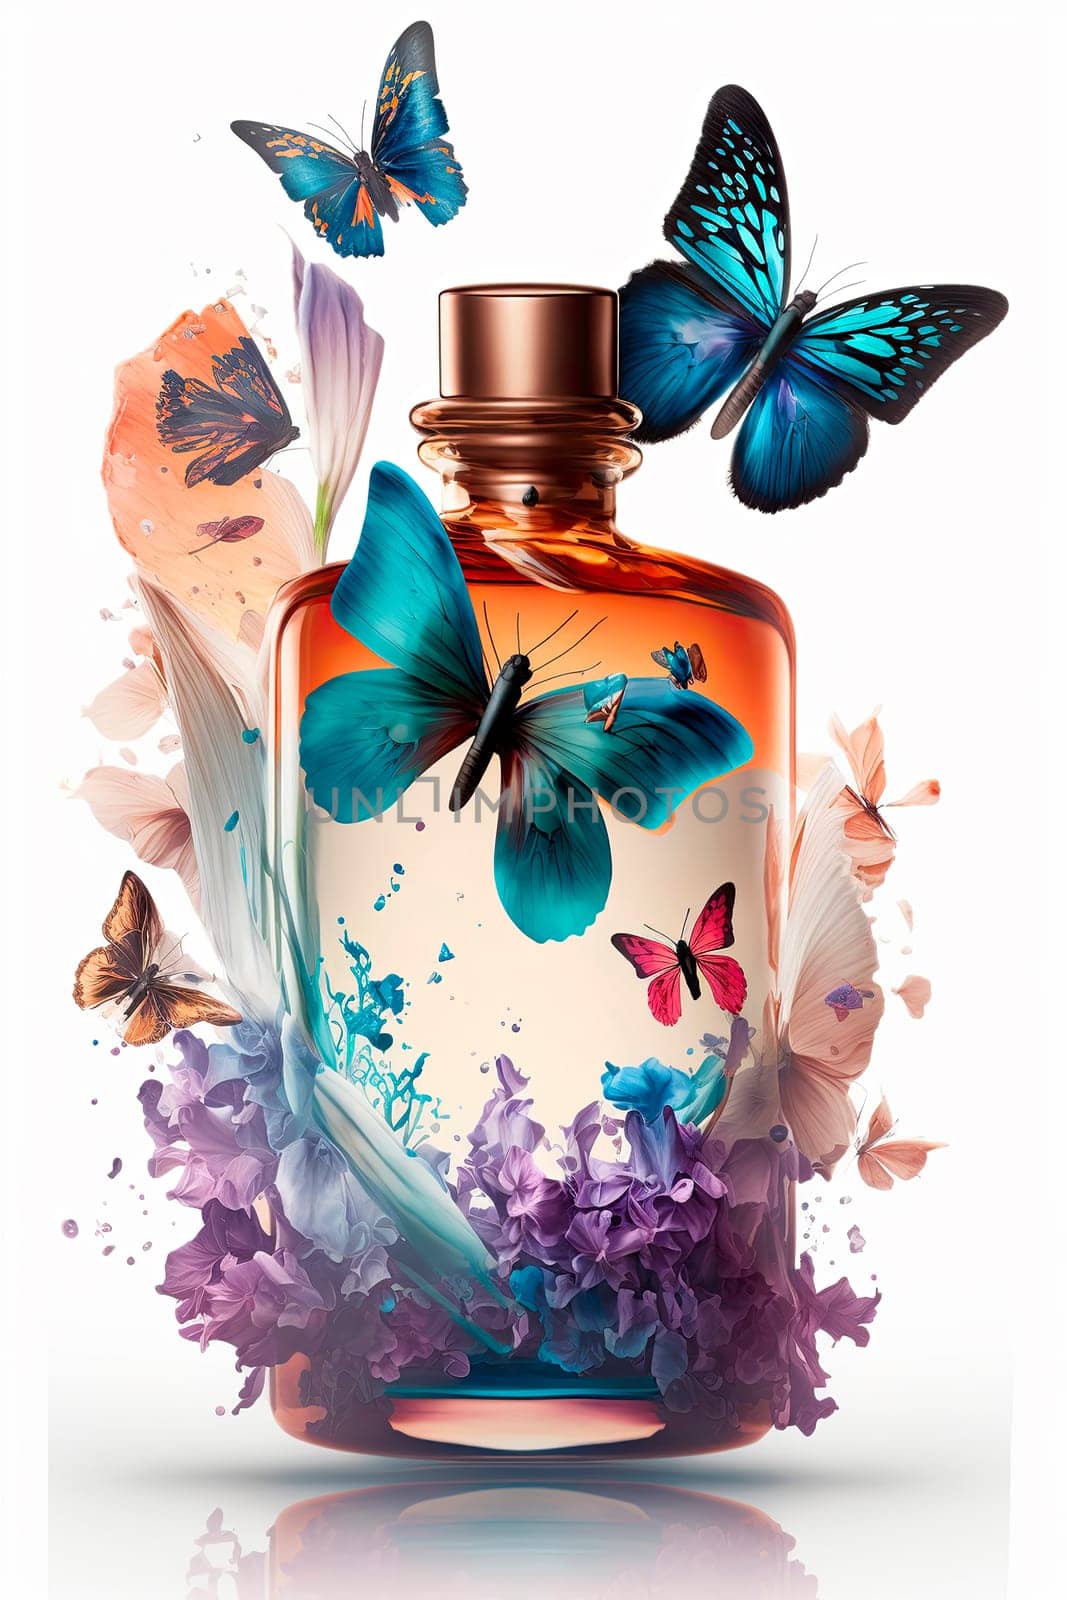 Perfume with floral aroma burst butterflies. by yanadjana